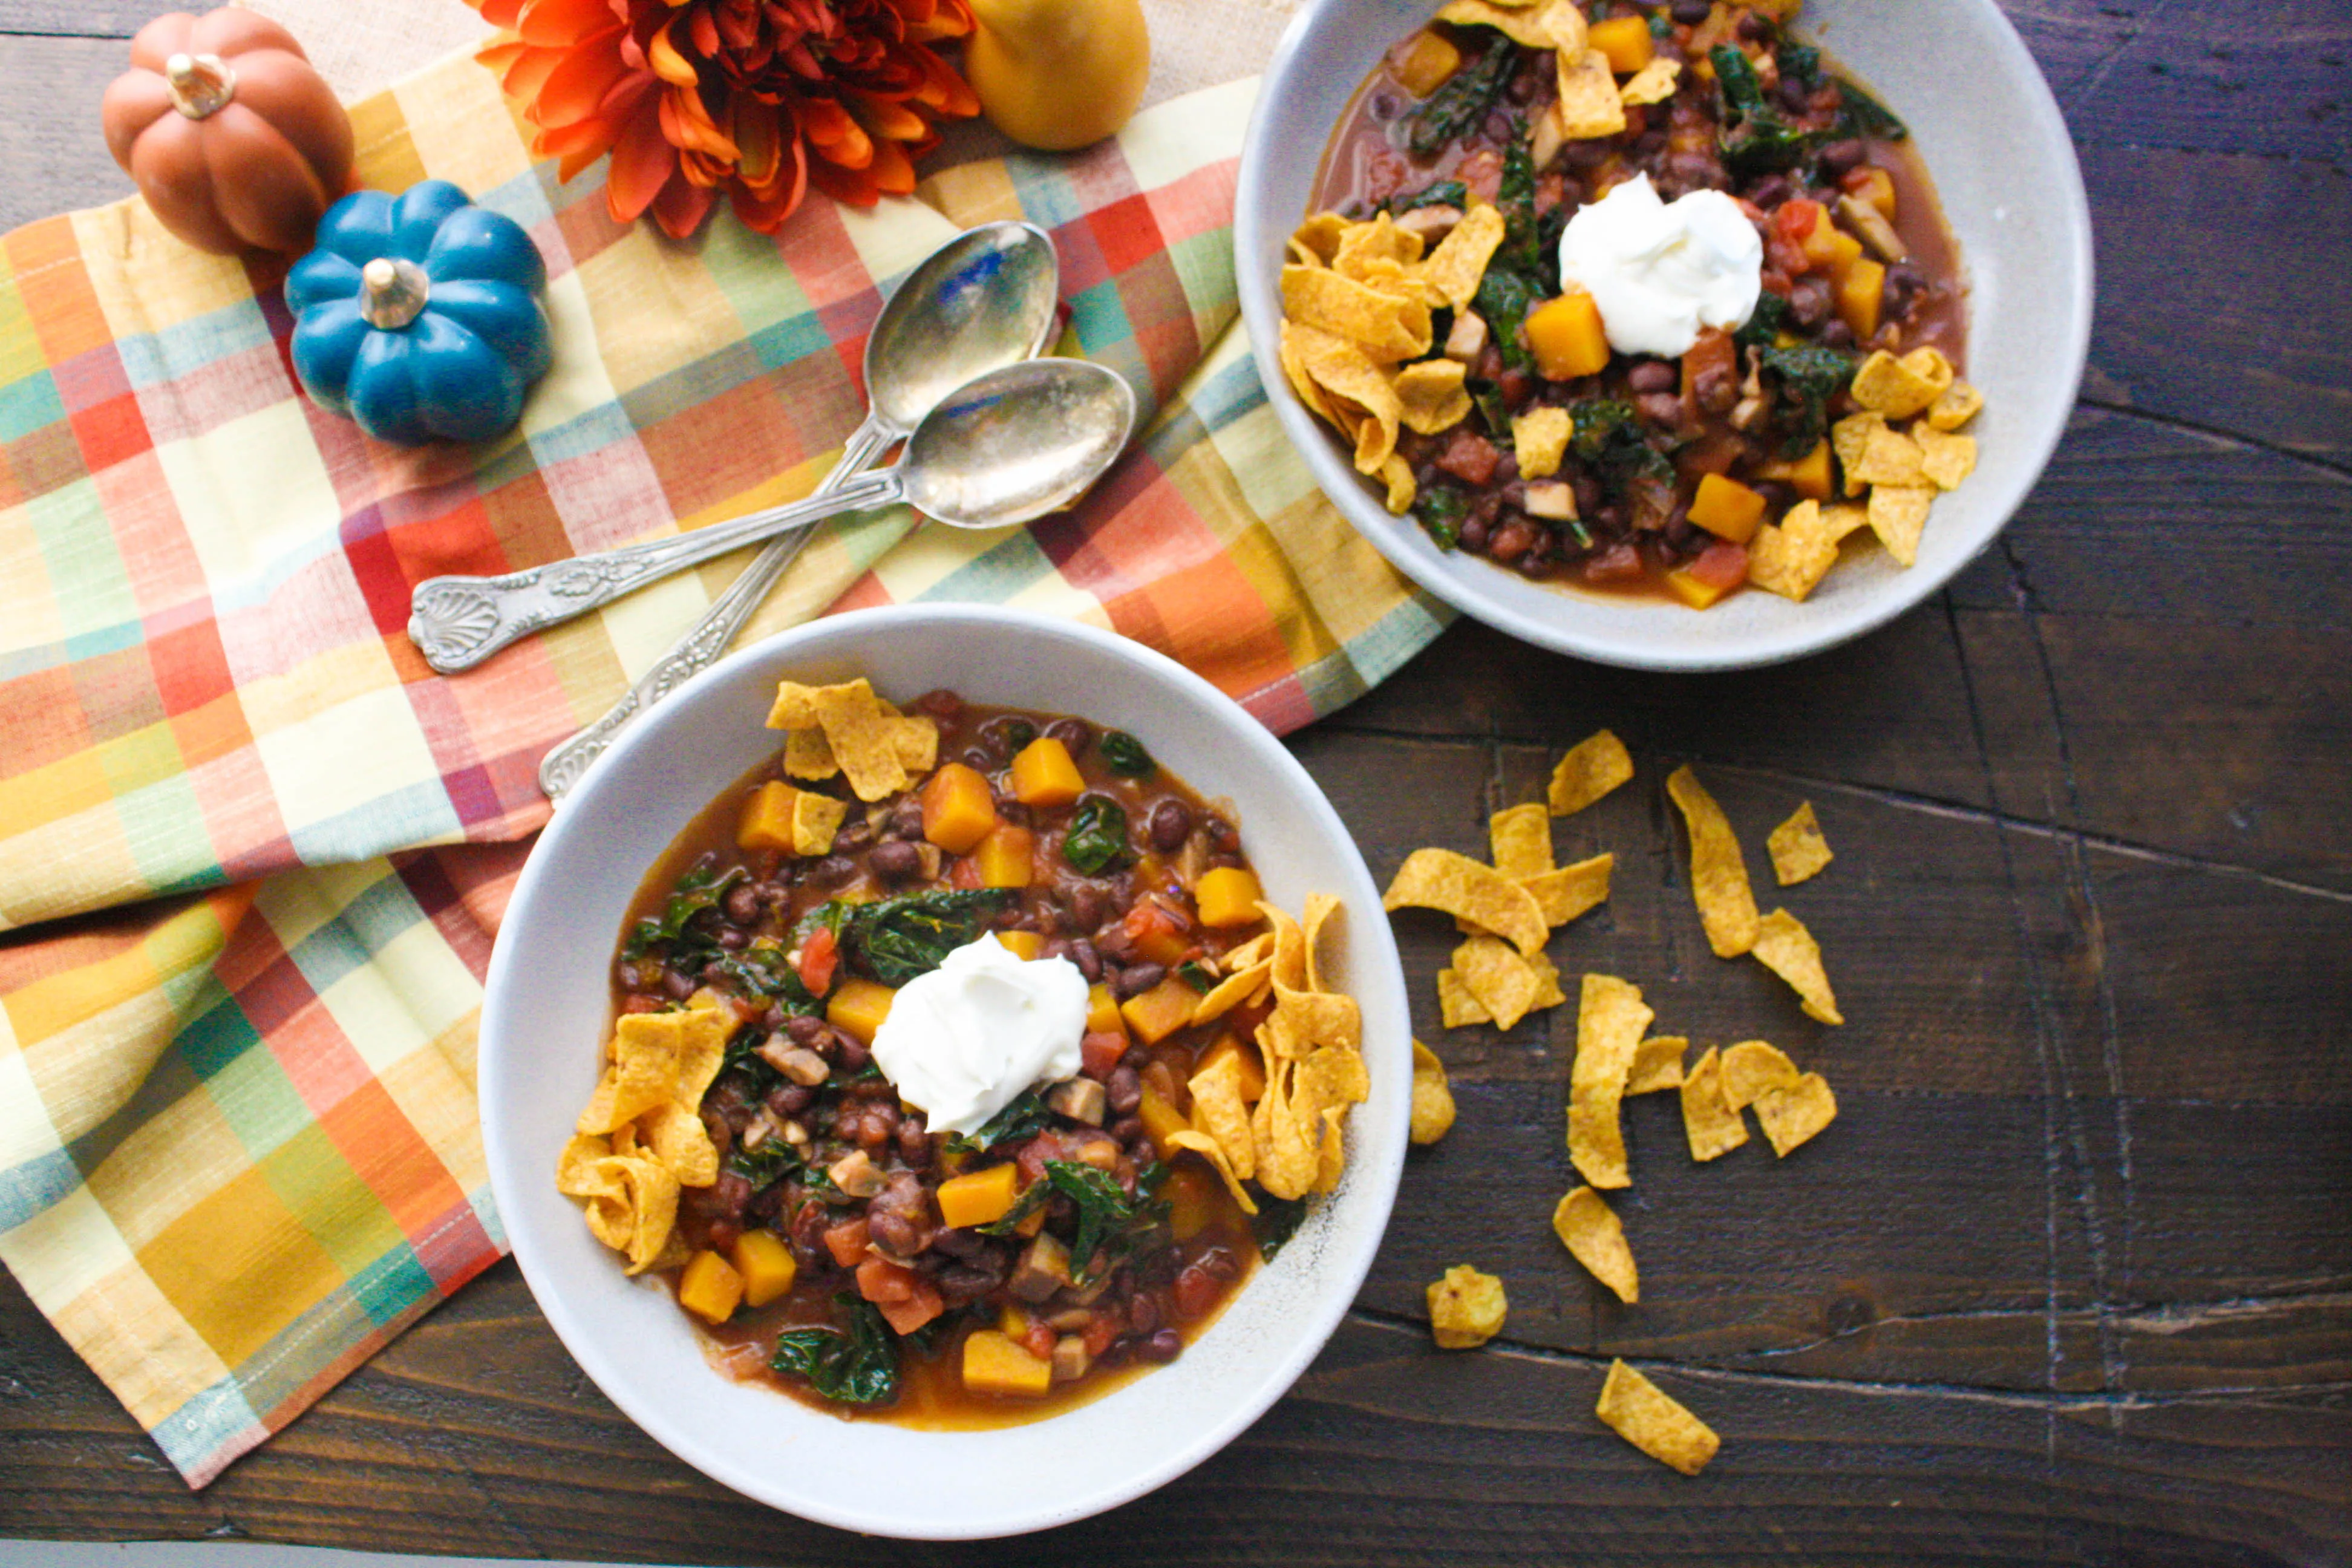 Everyone will love Butternut Squash and Black Bean Chili with Mushrooms & Kale. This recipe for Butternut Squash and Black Bean Chili with Mushrooms & Kale is easy to make, and the result is a tasty meal!